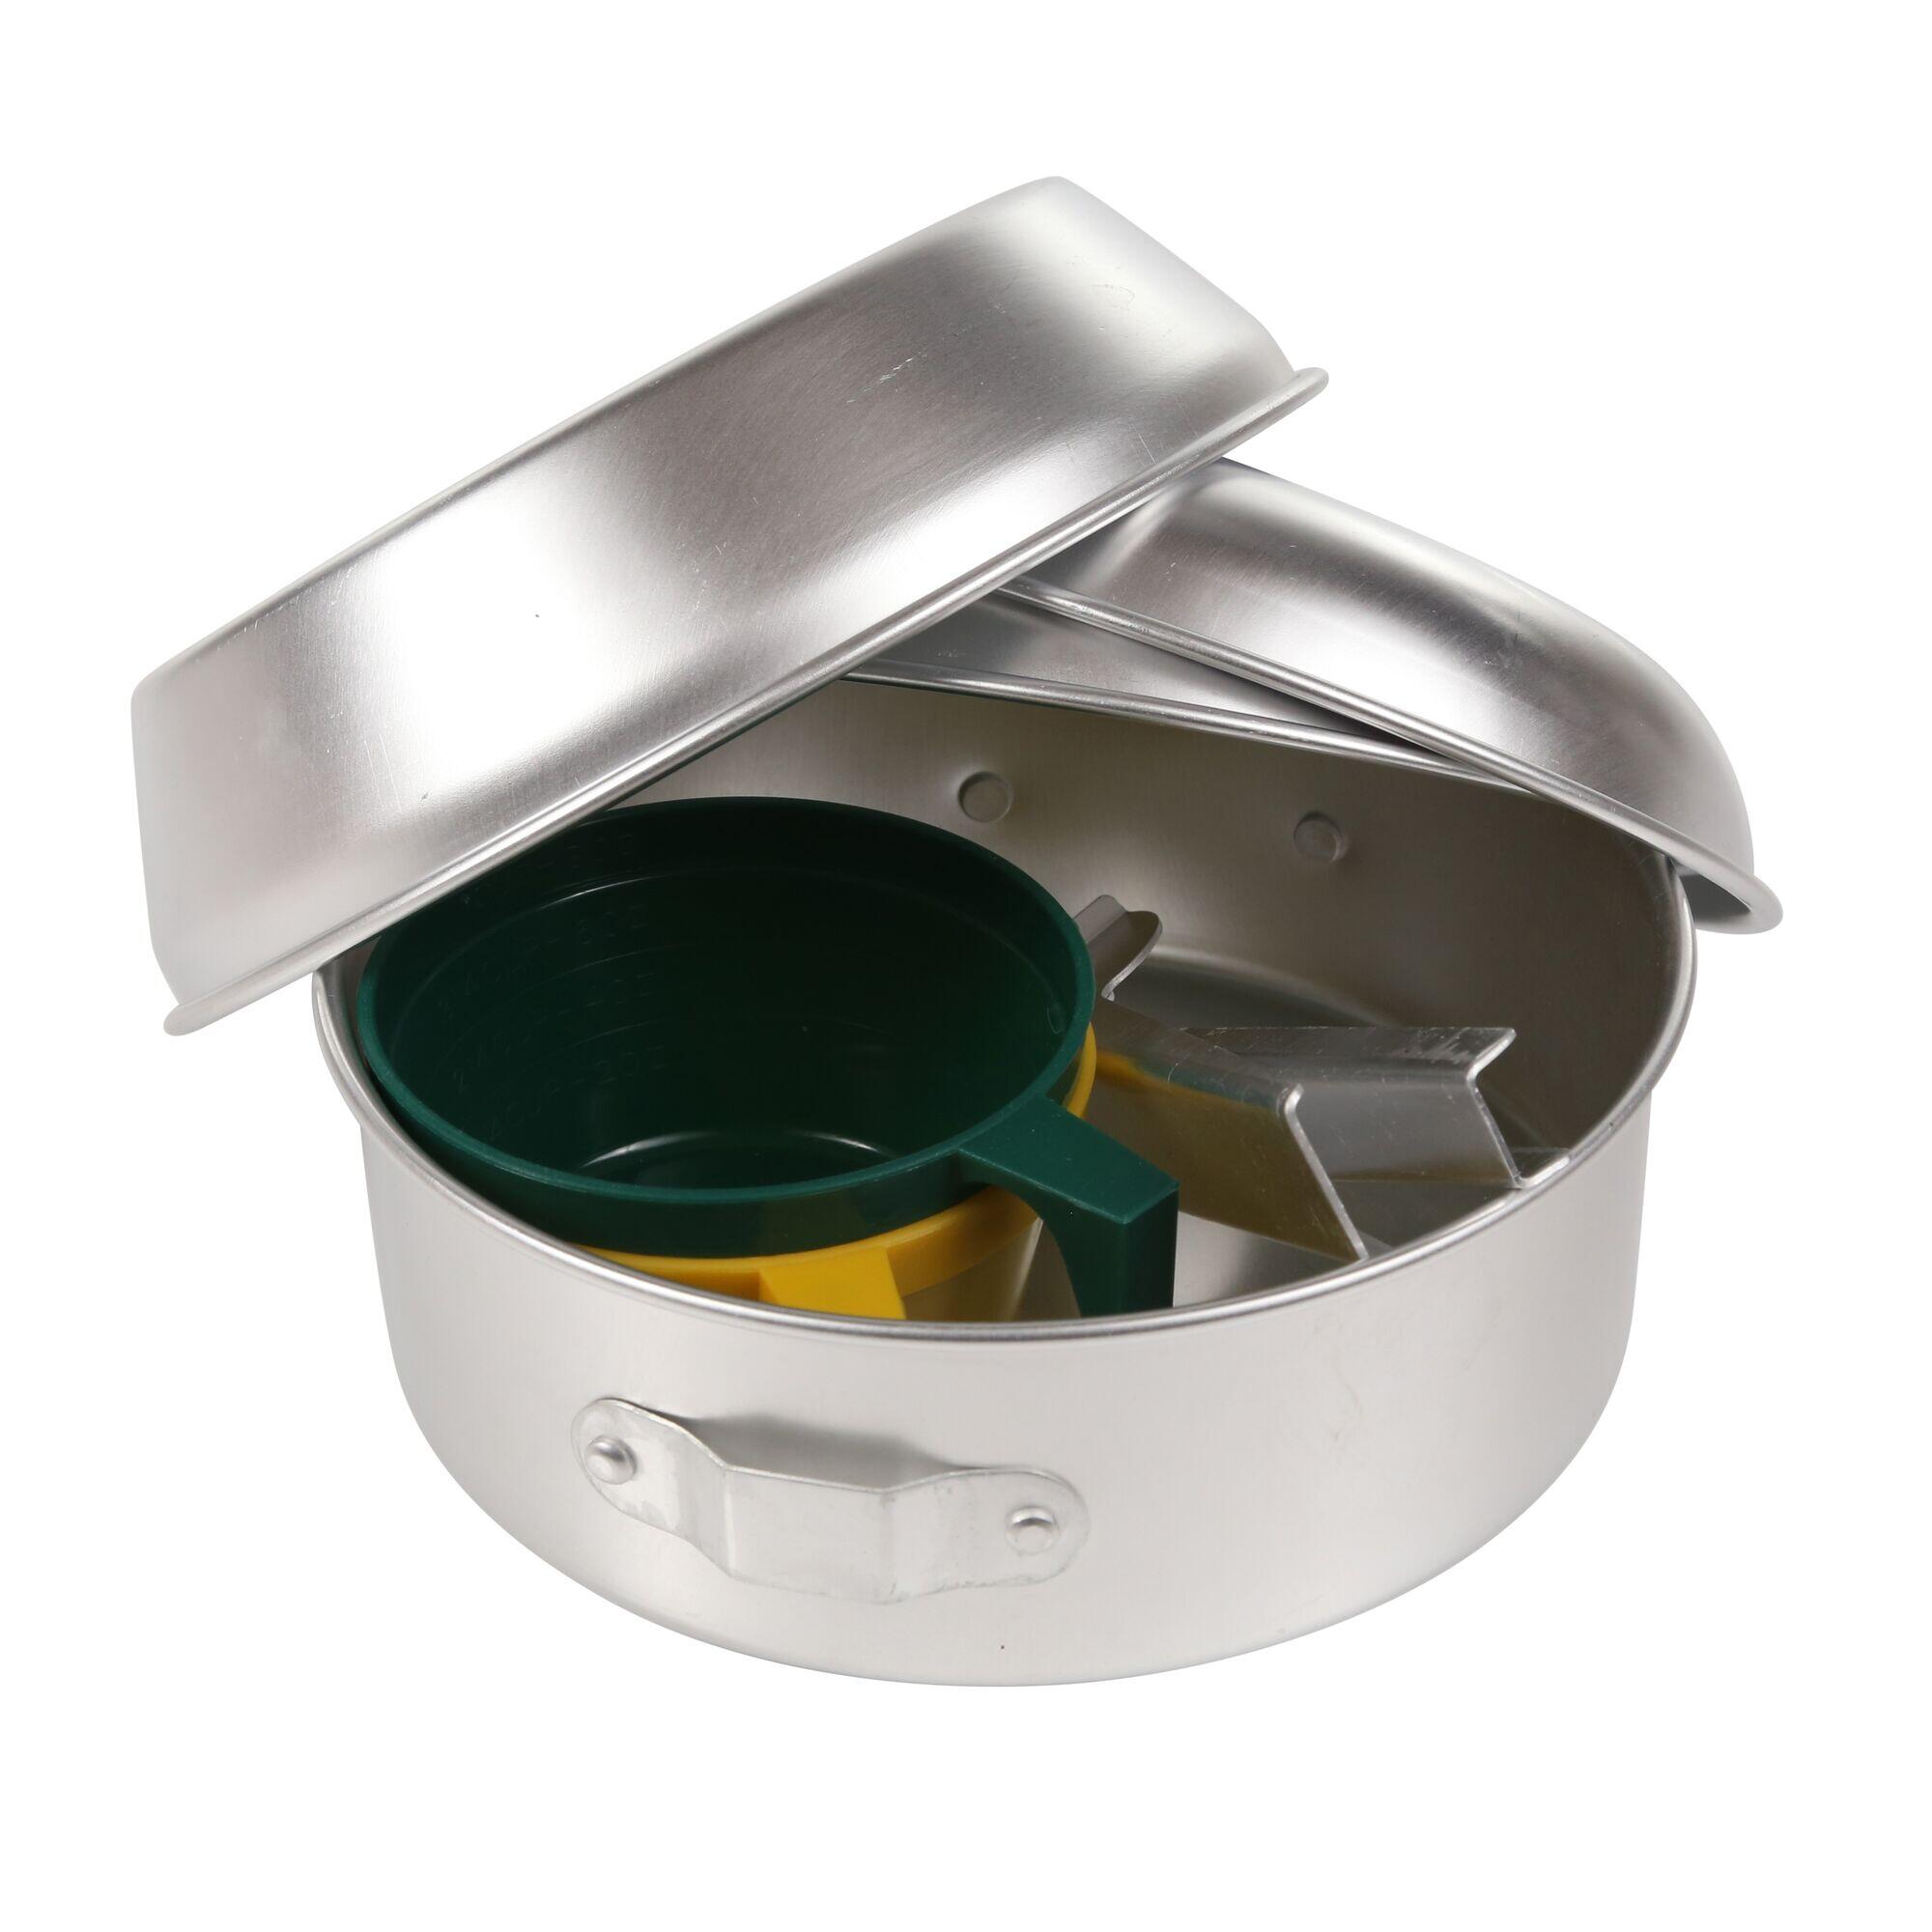 Compact Adults' Camping Cookset - Silver 3/5